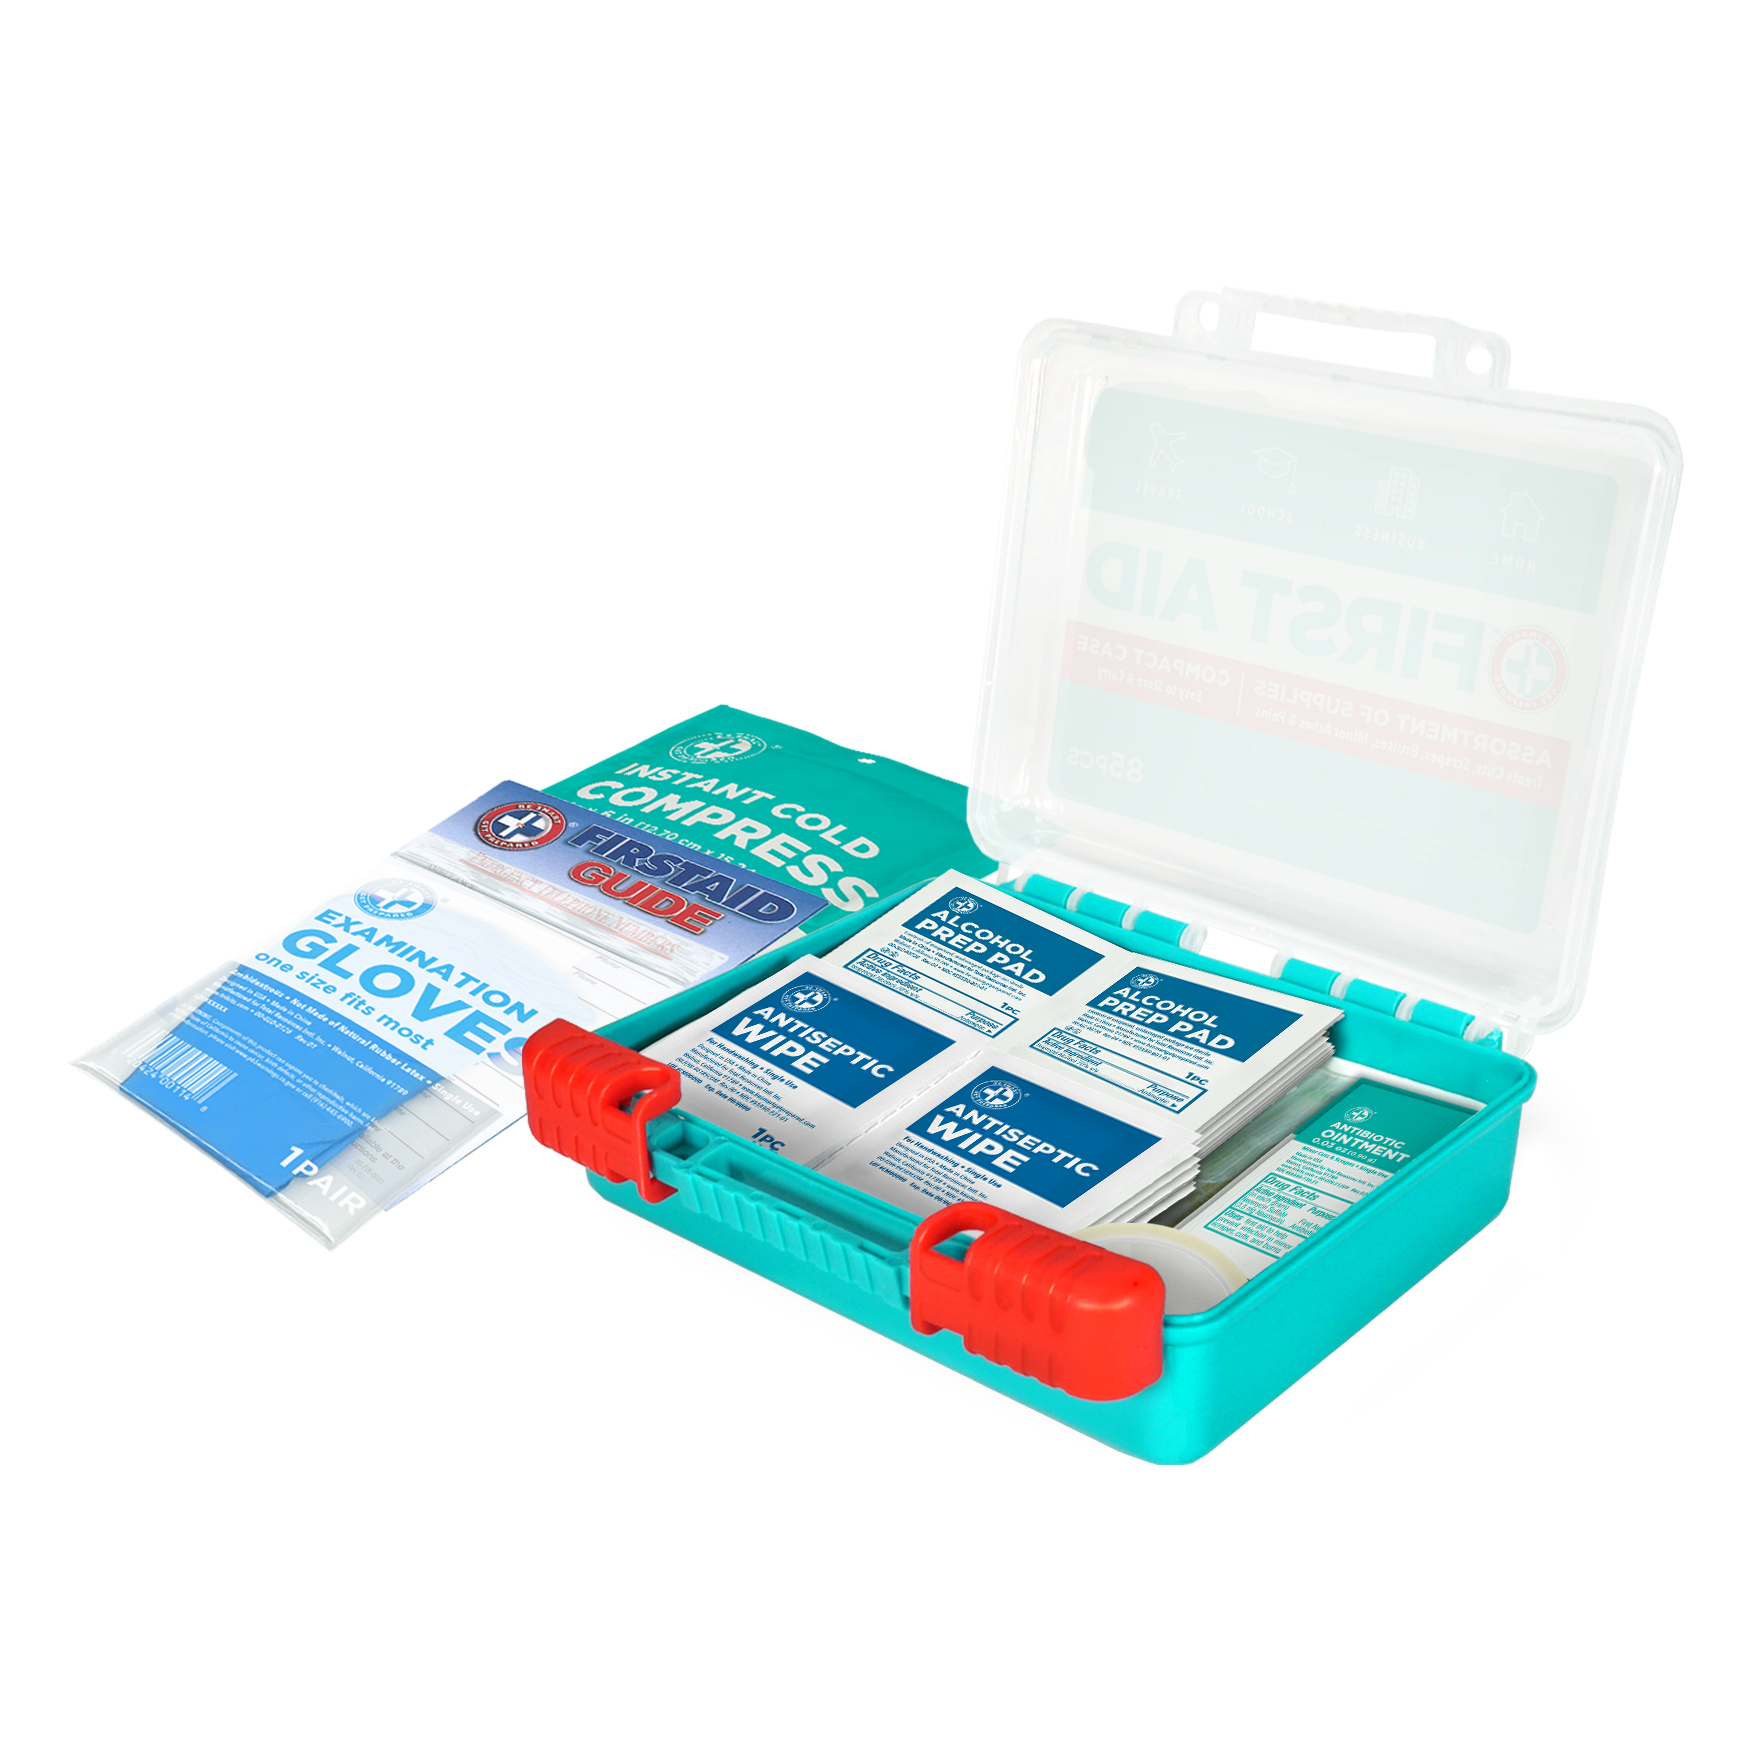 Be Smart Get Prepared First Aid Kit, 85 count - image 4 of 7